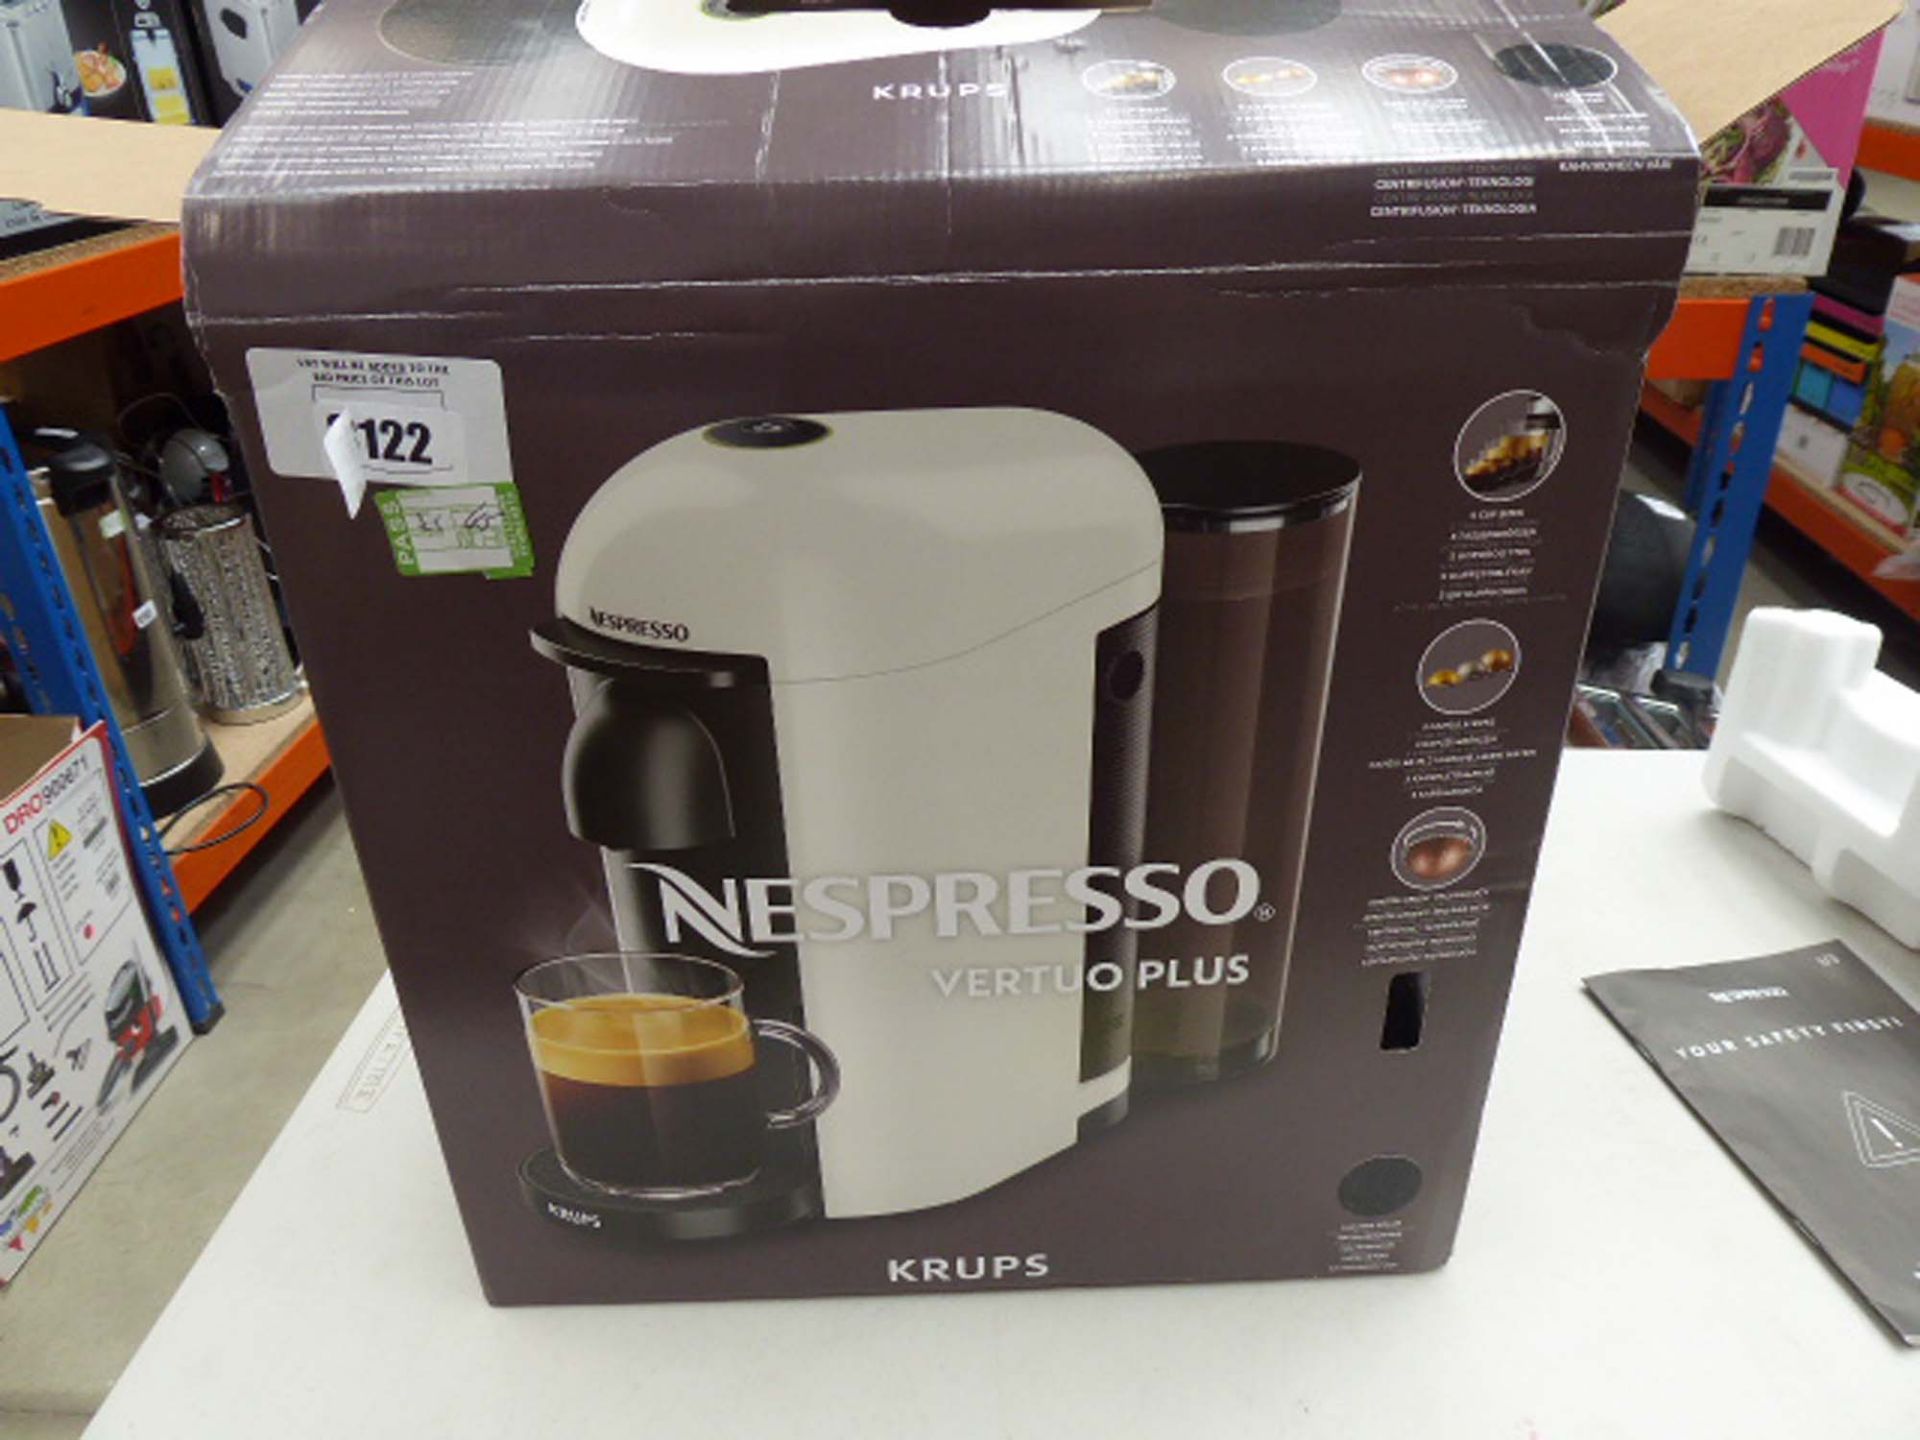 3122 - Nespresso Virtue Plus coffee machine with box Used, appears to be complete